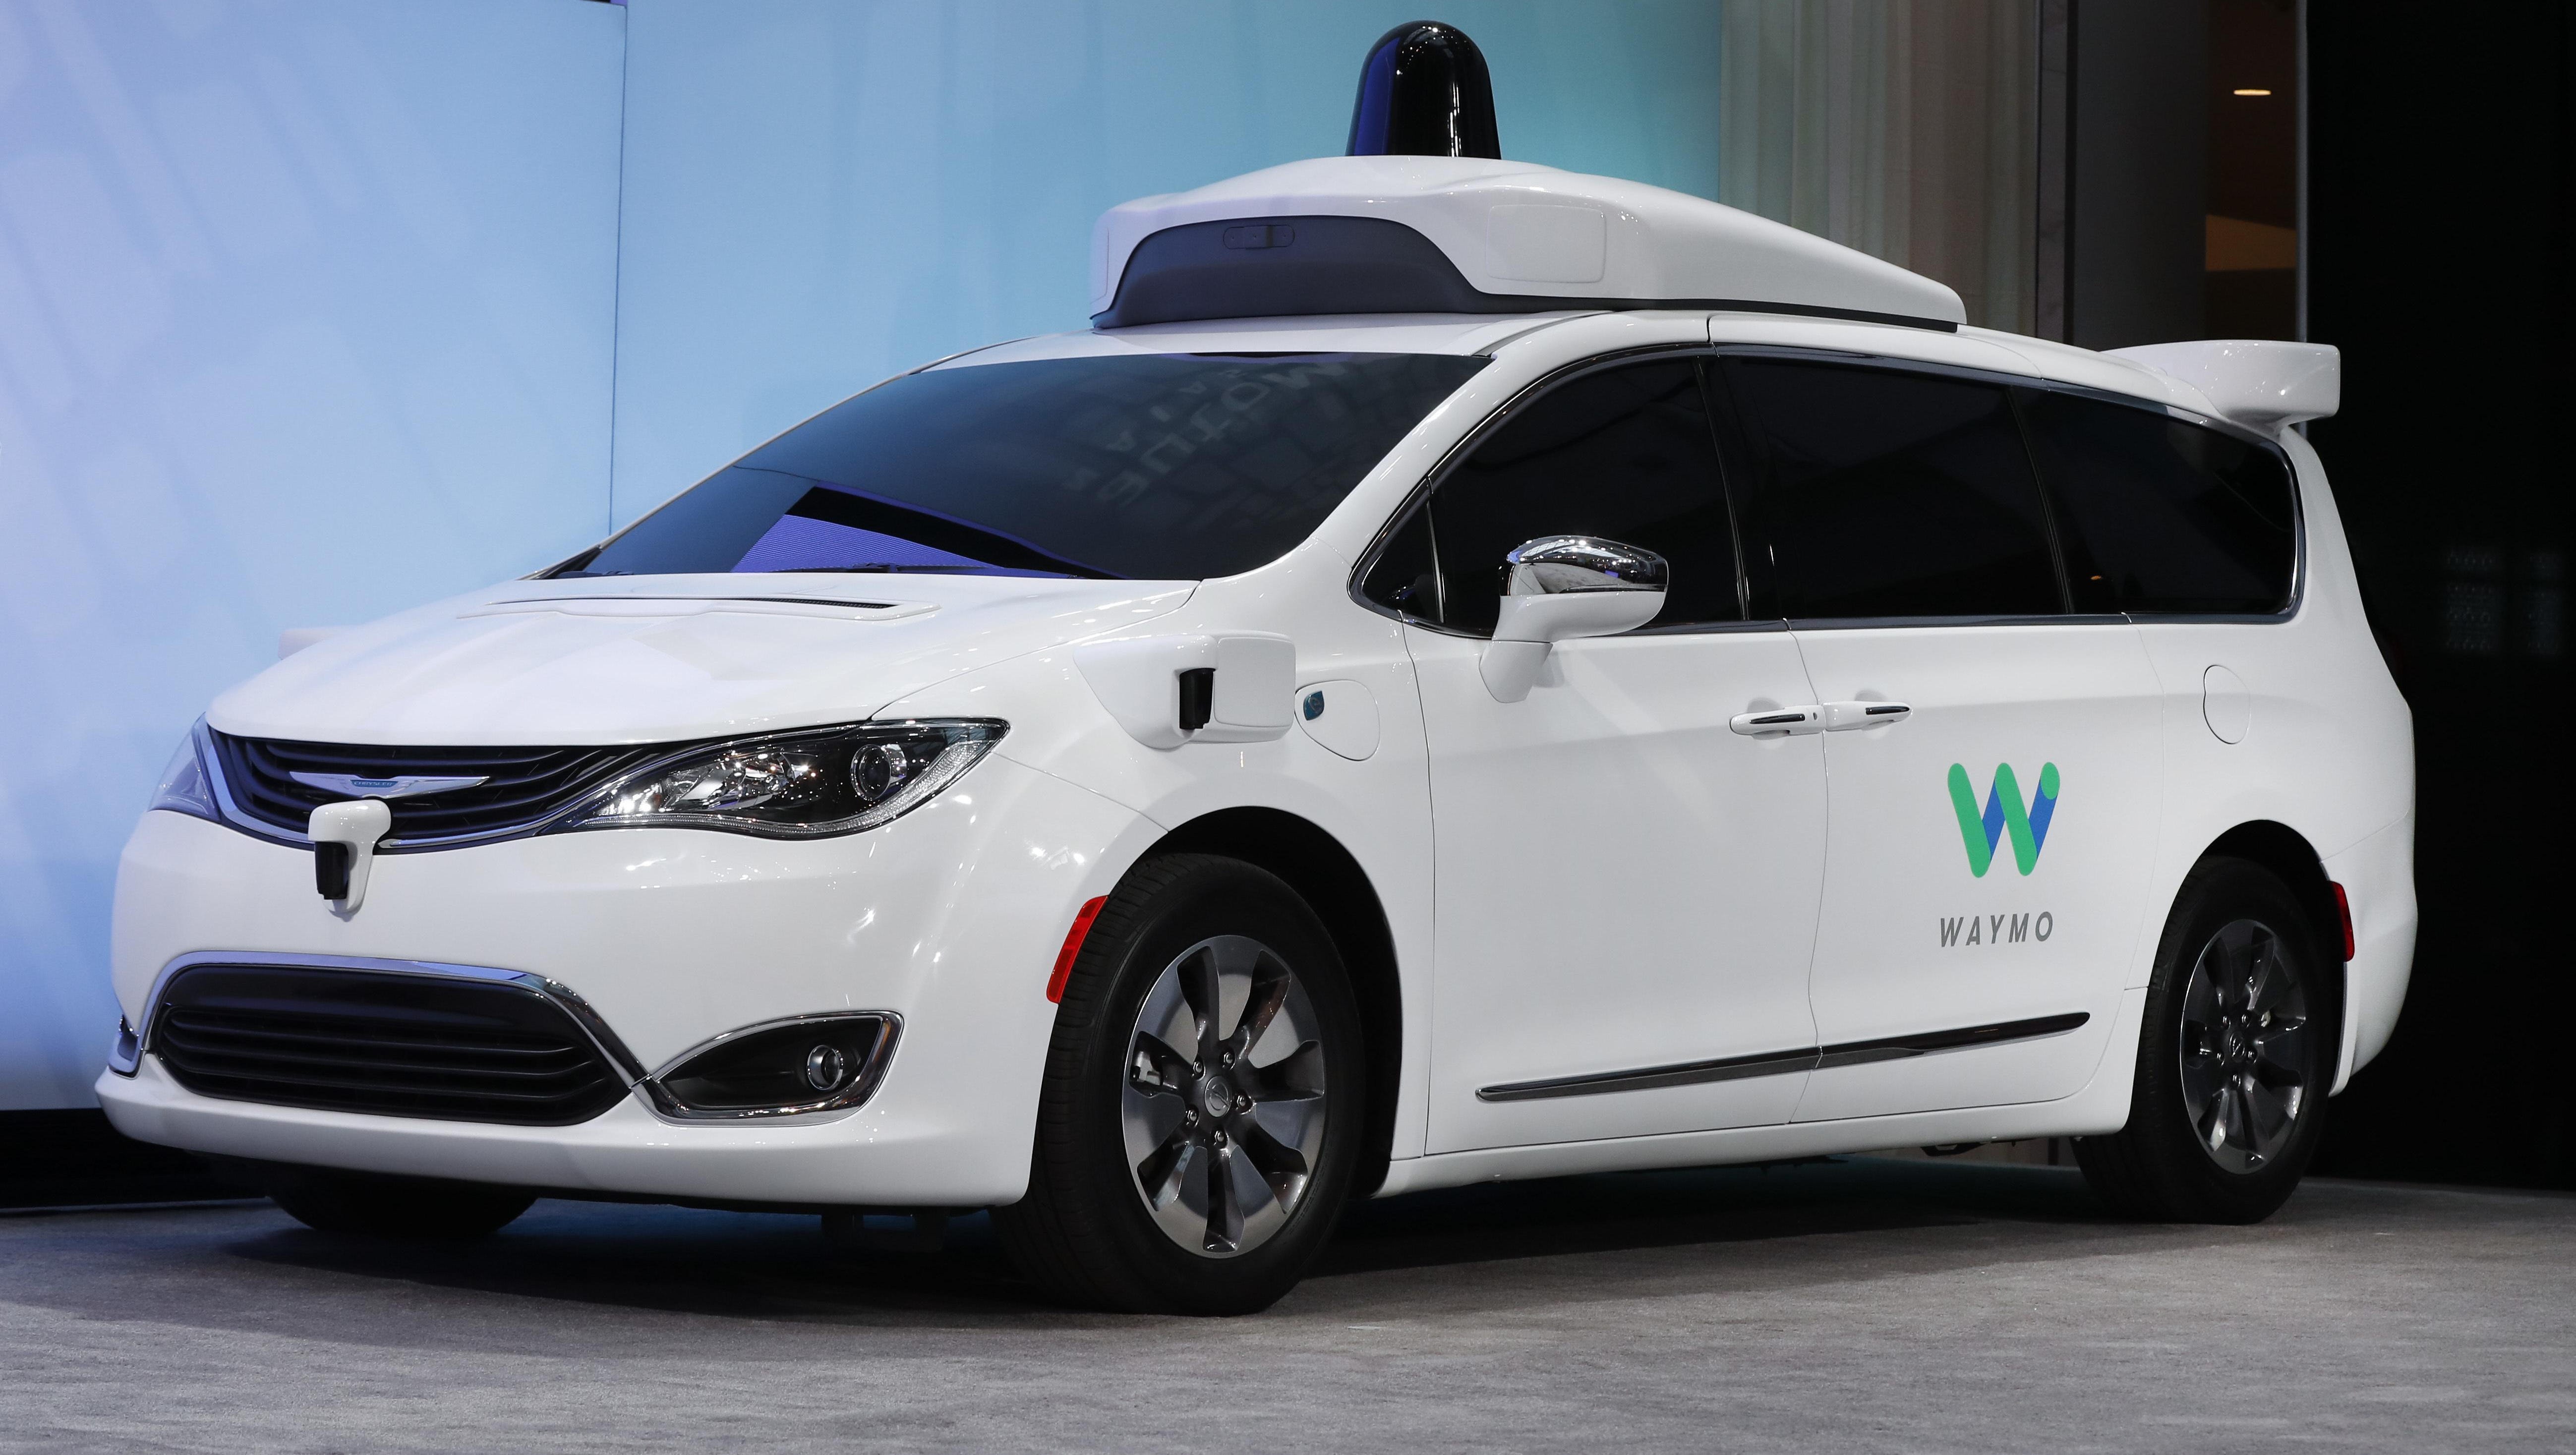 Patterned after its tie-up with Waymo LLC using Pacifica minivans, parent Fiat Chrysler Automobiles NV is partnering with Aurora to develop self-driving technology paired with the automaker's Ram commercial vehicles.